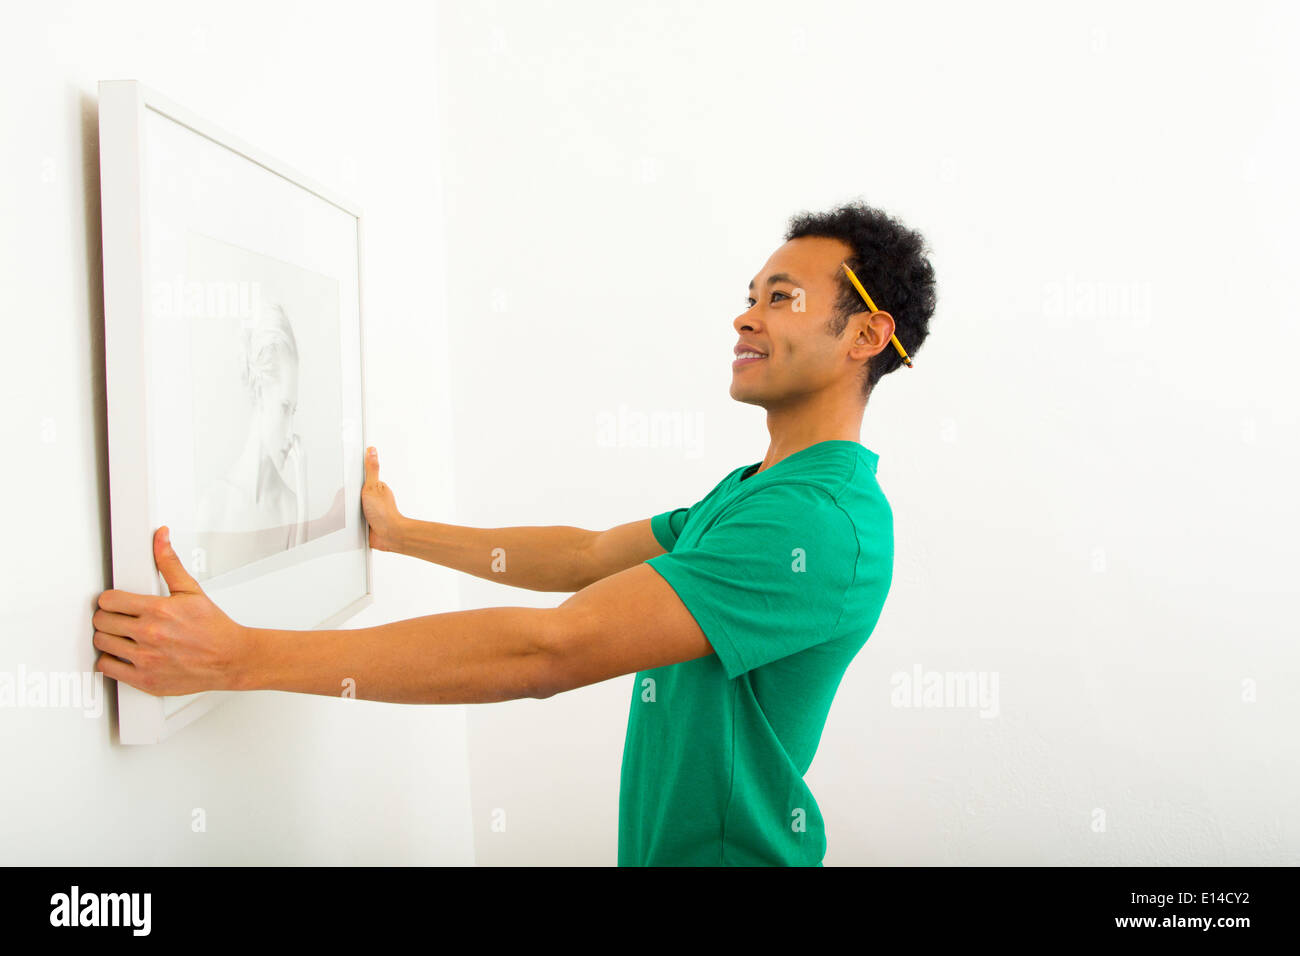 Mixed race man hanging picture on wall Stock Photo